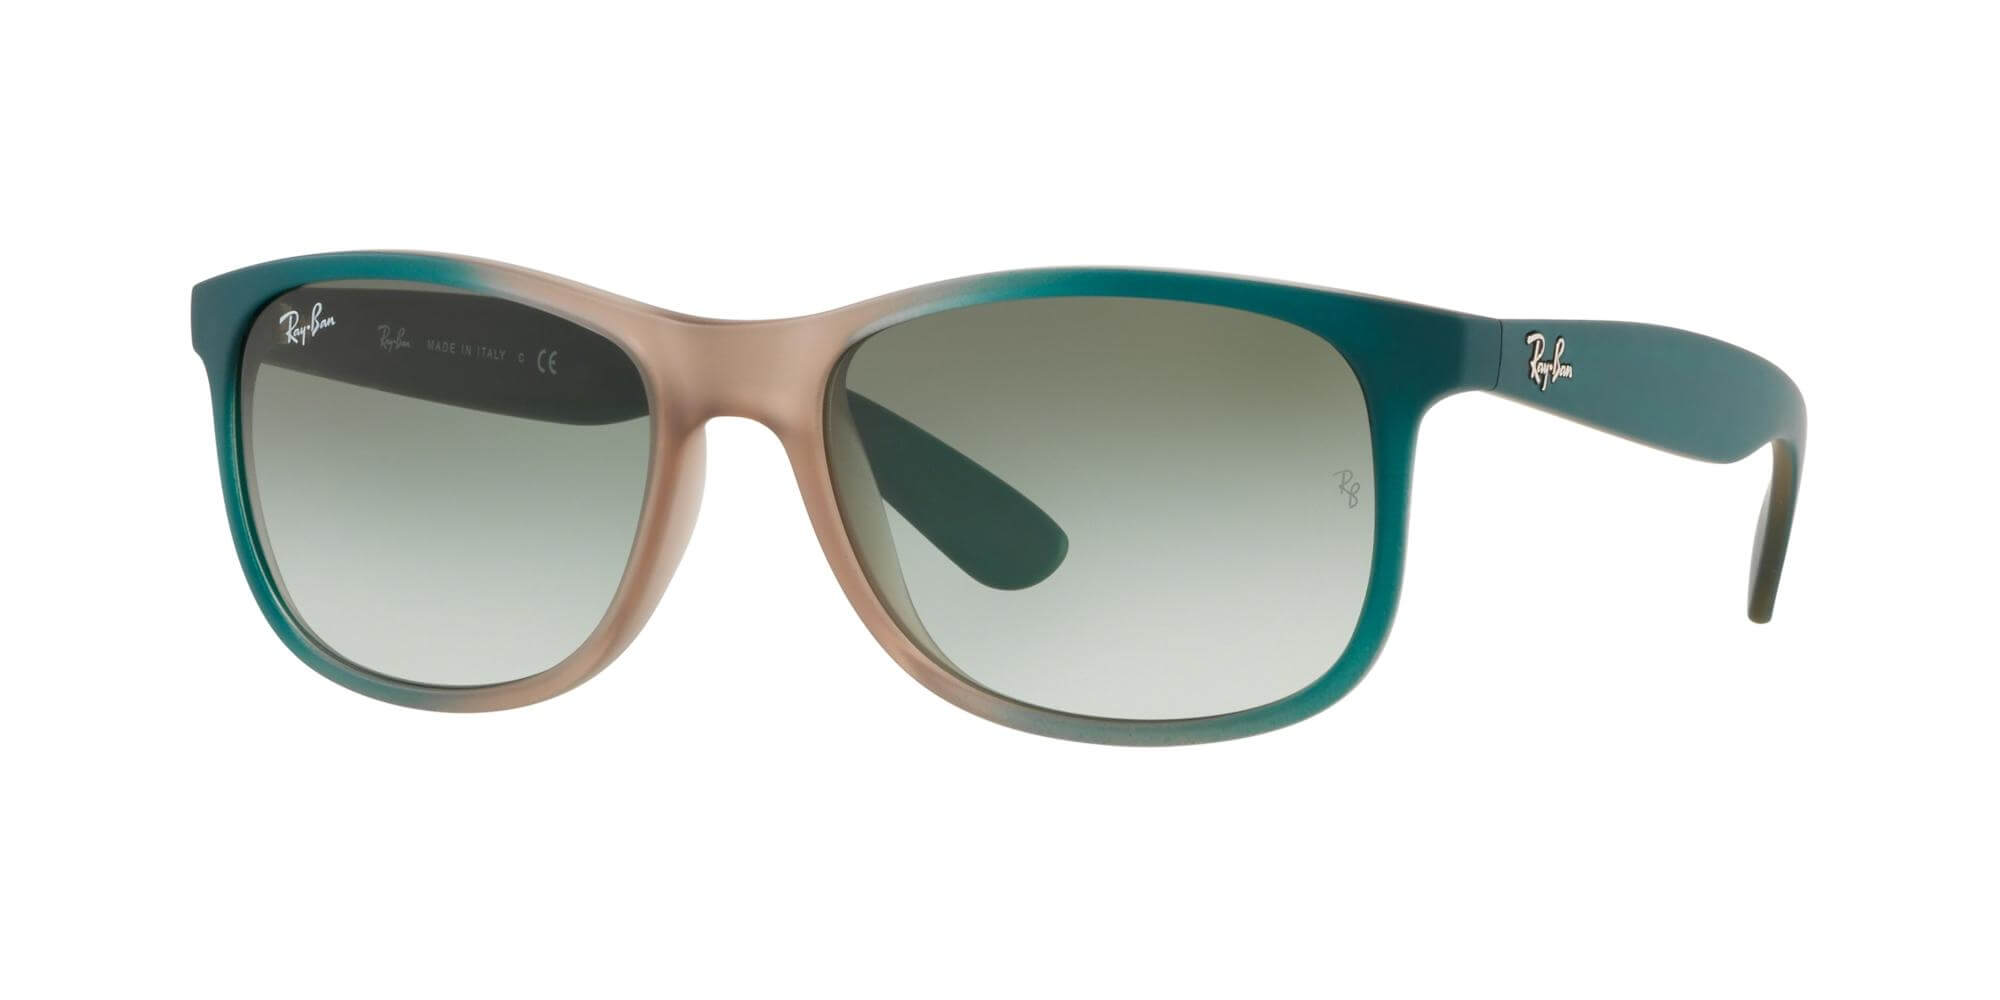 Ray-BanANDY RB 4202Green Brown/green Shaded (6368/8E)